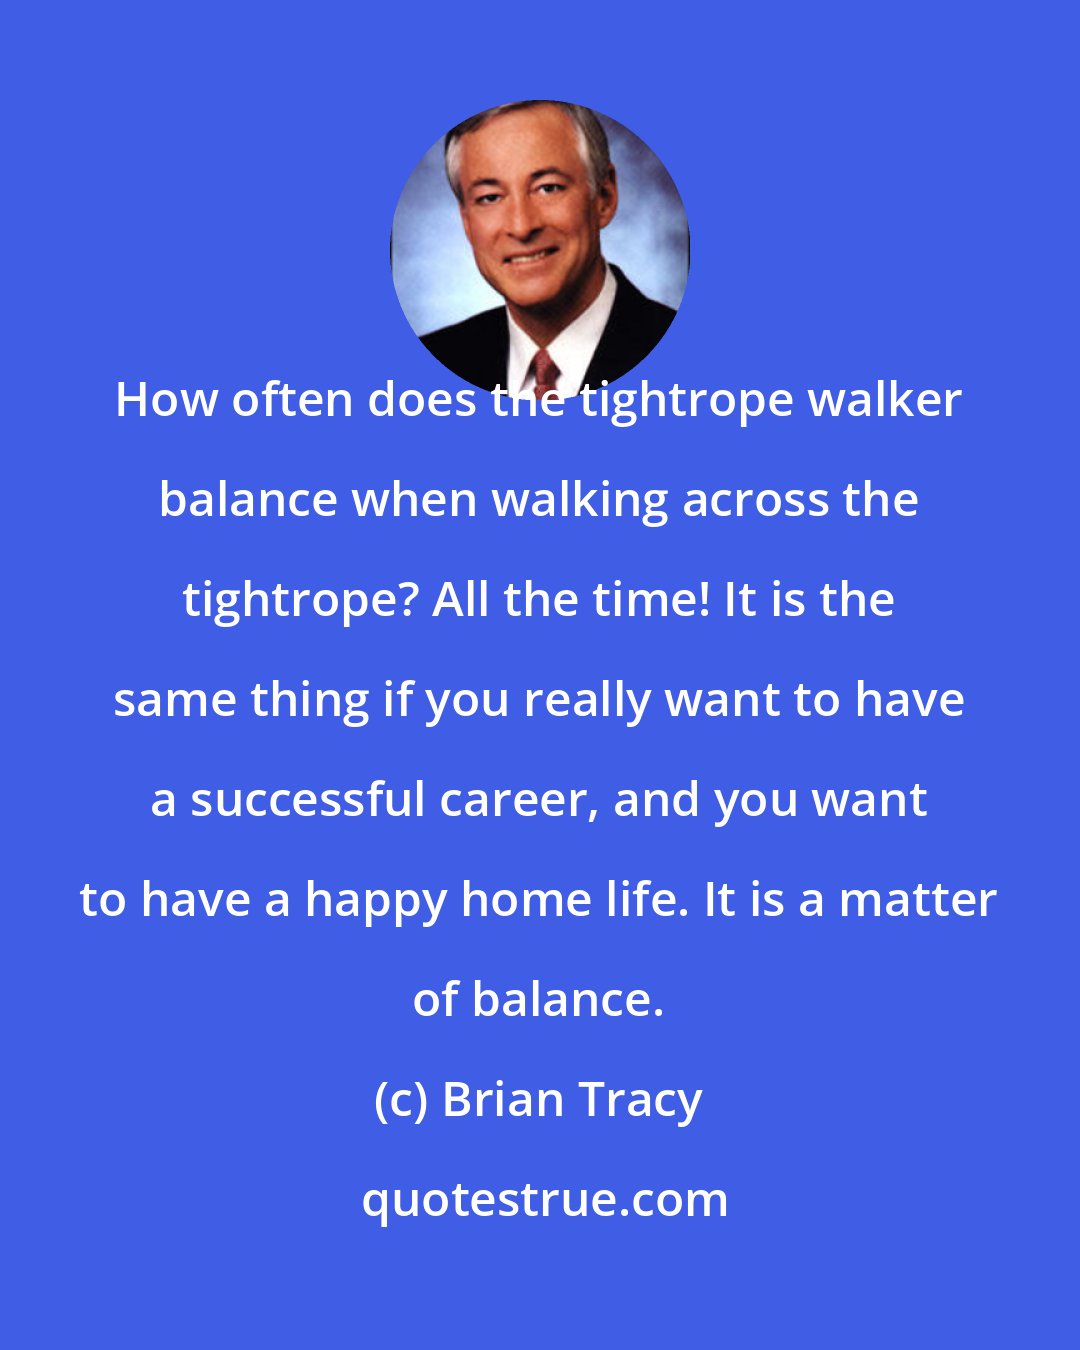 Brian Tracy: How often does the tightrope walker balance when walking across the tightrope? All the time! It is the same thing if you really want to have a successful career, and you want to have a happy home life. It is a matter of balance.